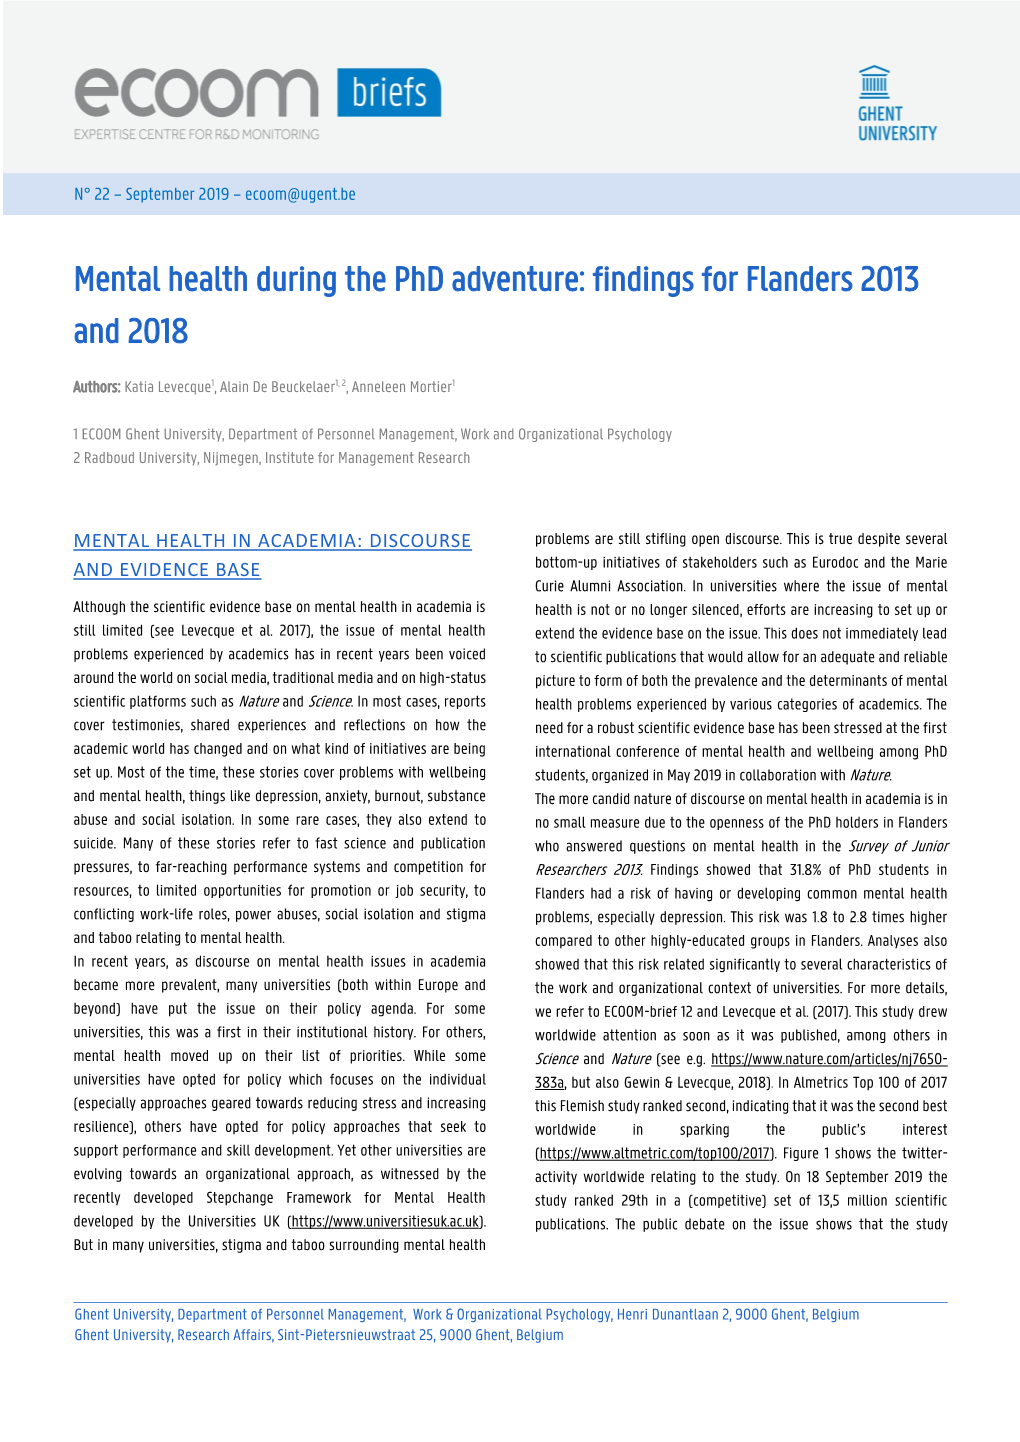 Mental Health During the Phd Adventure: Findings for Flanders 2013 and 2018